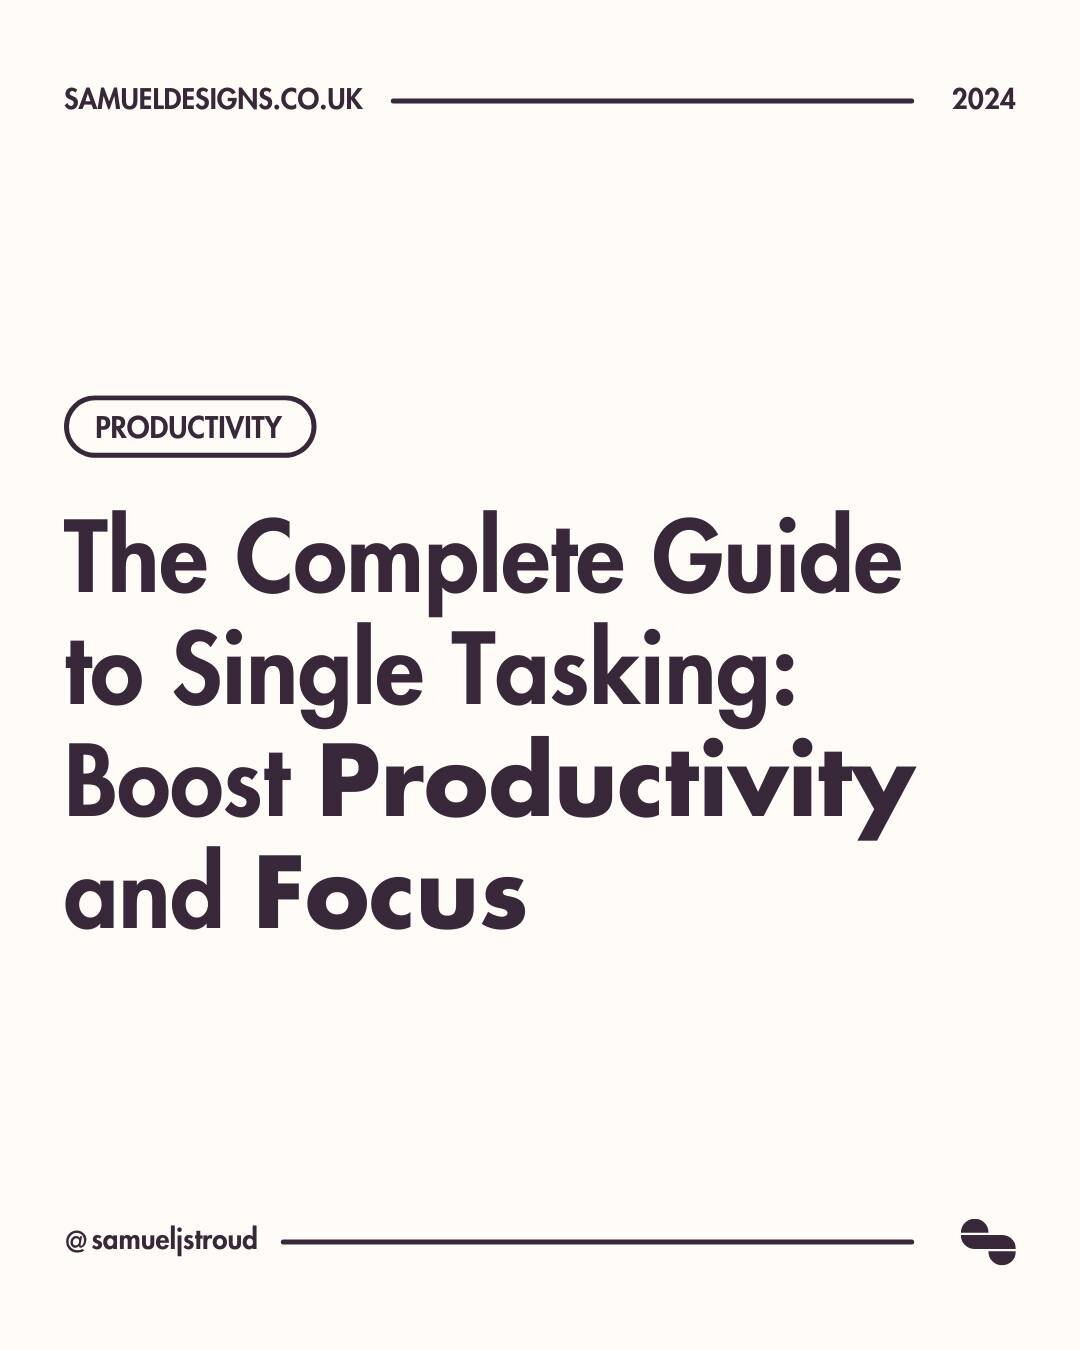 Since I began freelancing, I&rsquo;ve become obsessed with productivity.

Not necessarily getting as many things done as possible, but rather frameworks to help make life easier.

And by far the best one I&rsquo;ve found is Single Tasking.

Incredibl